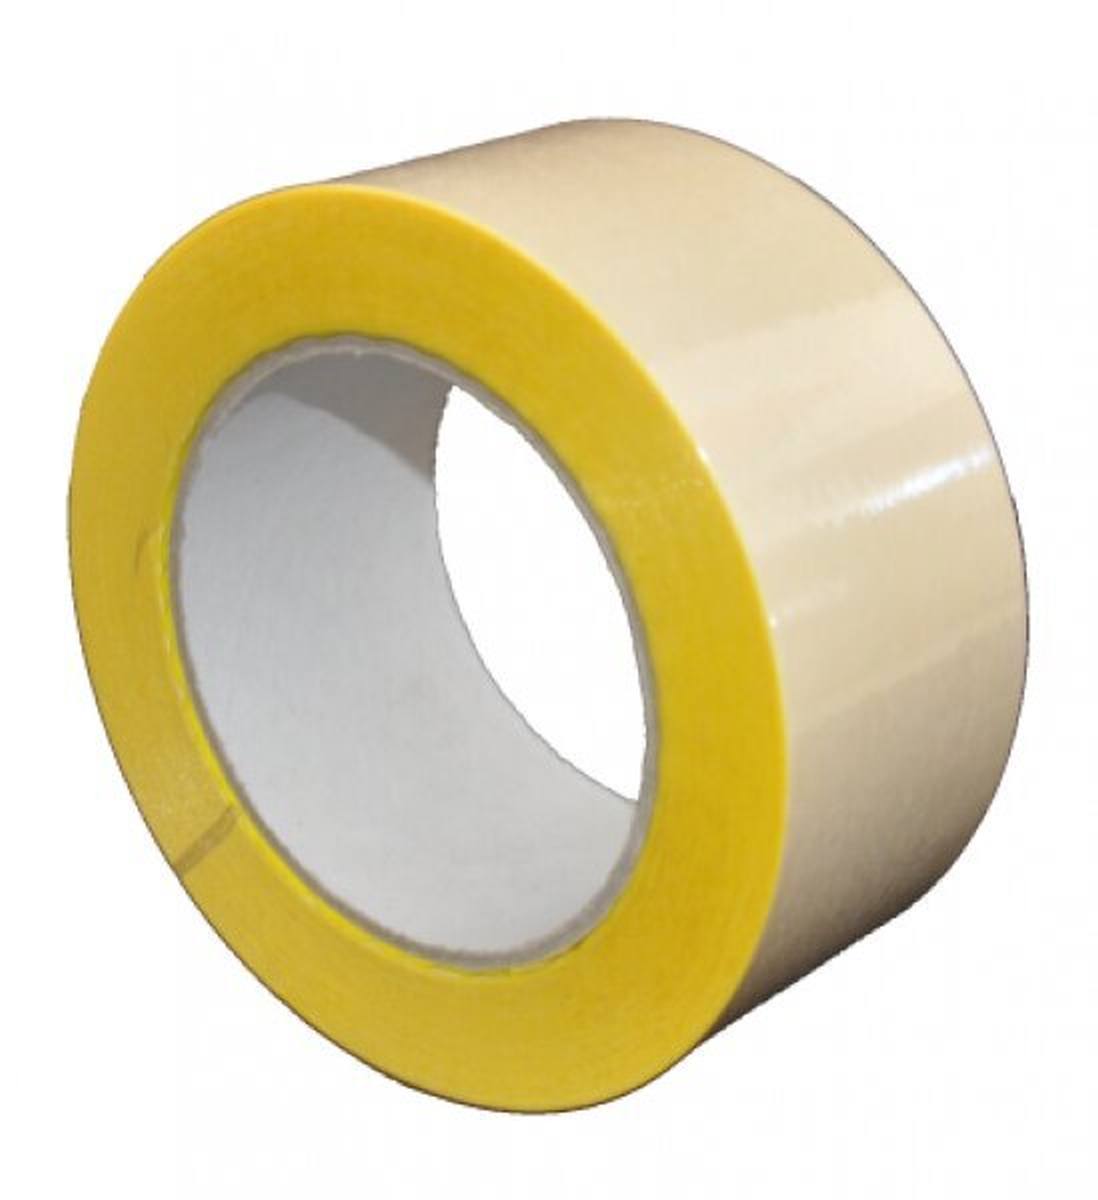 S-K-S 407 Double-sided adhesive tape with polypropylene backing, high / low tack, yellow, 250 mm x 50 m, 0.15 mm